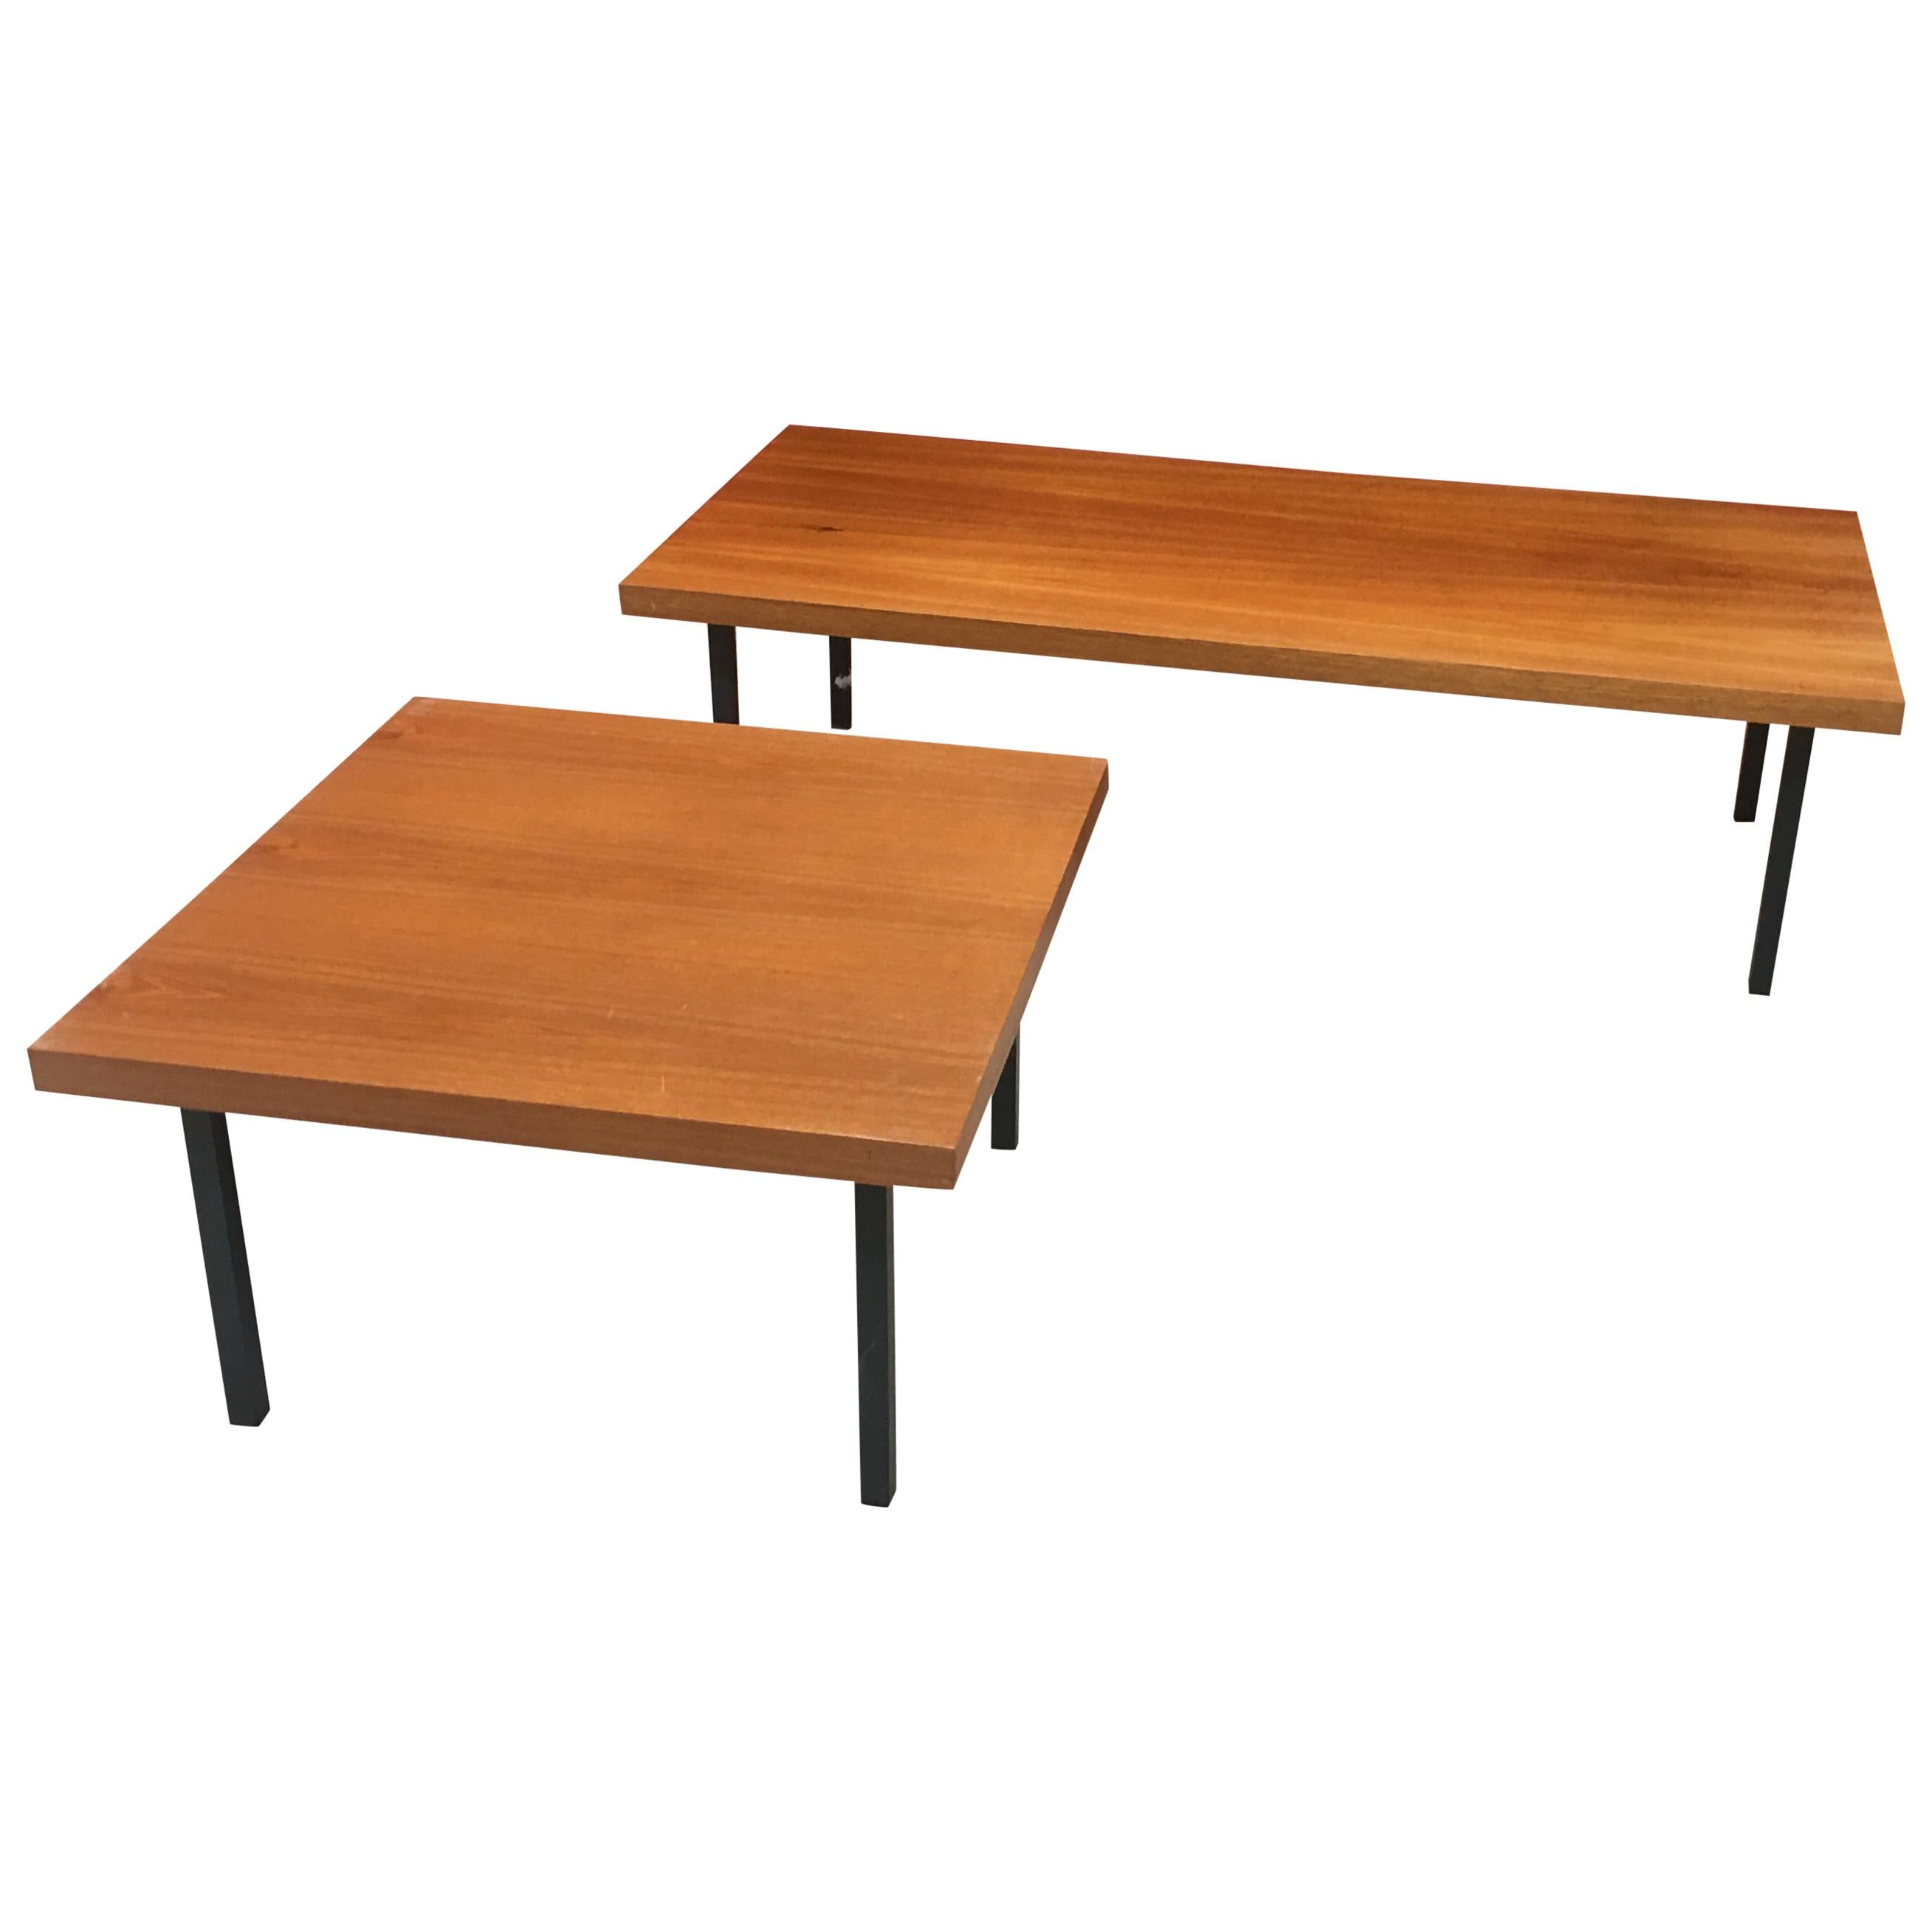 2 Coffee Tables in Knoll Style, circa 1960